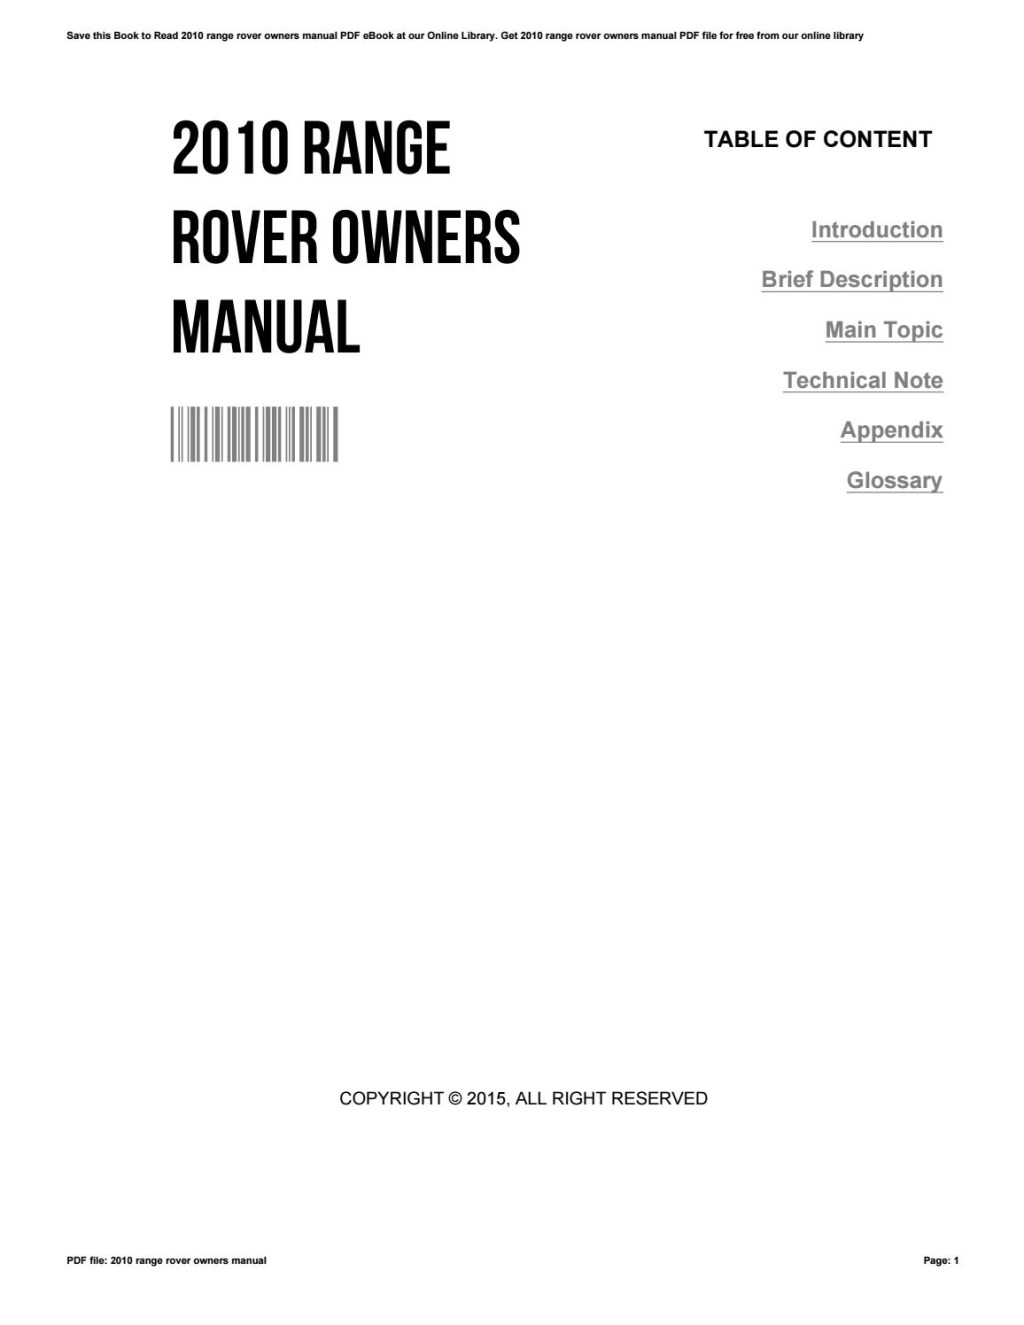 range rover owners manual by rblx - Issuu